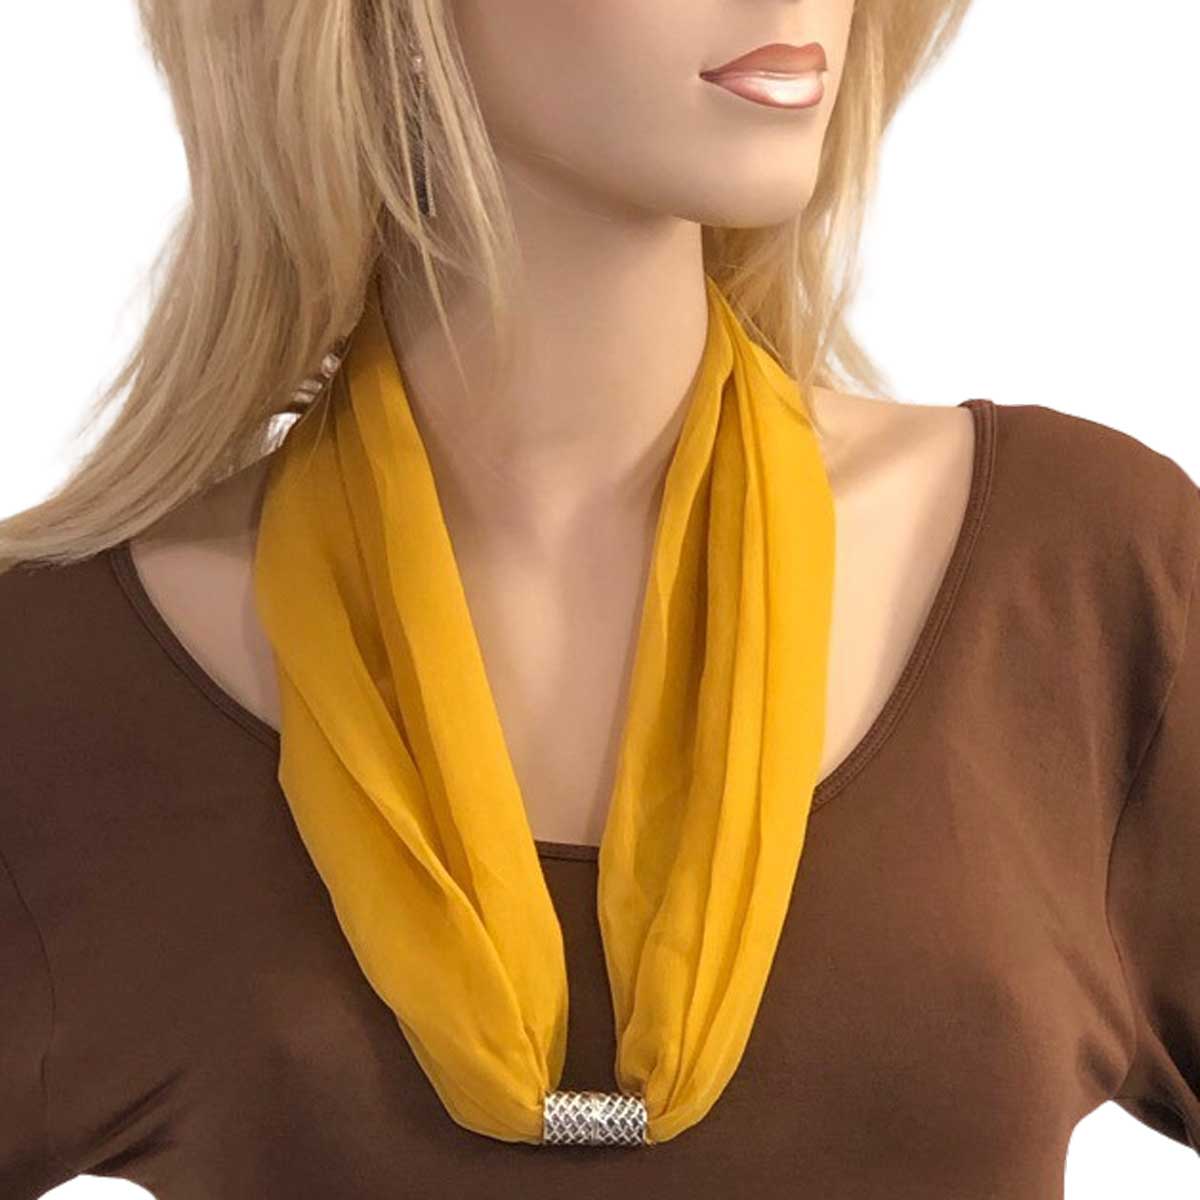 SMU - Solid Mustard<br>
Magnetic Clasp Silky Dress Scarf